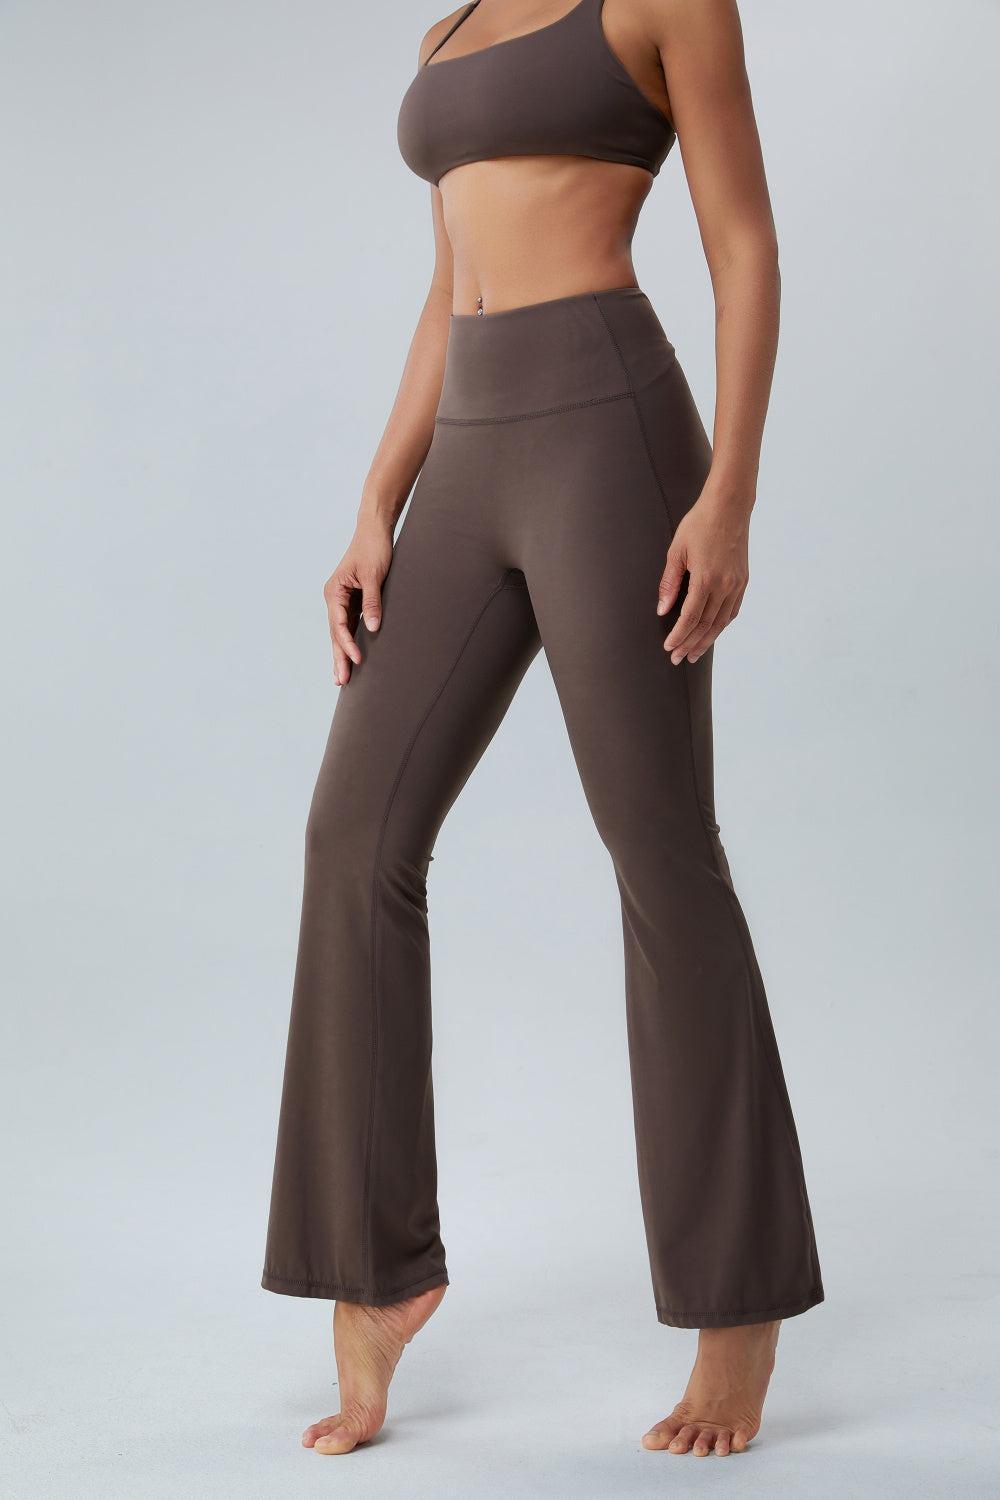 a woman in a bra top and wide legged pants